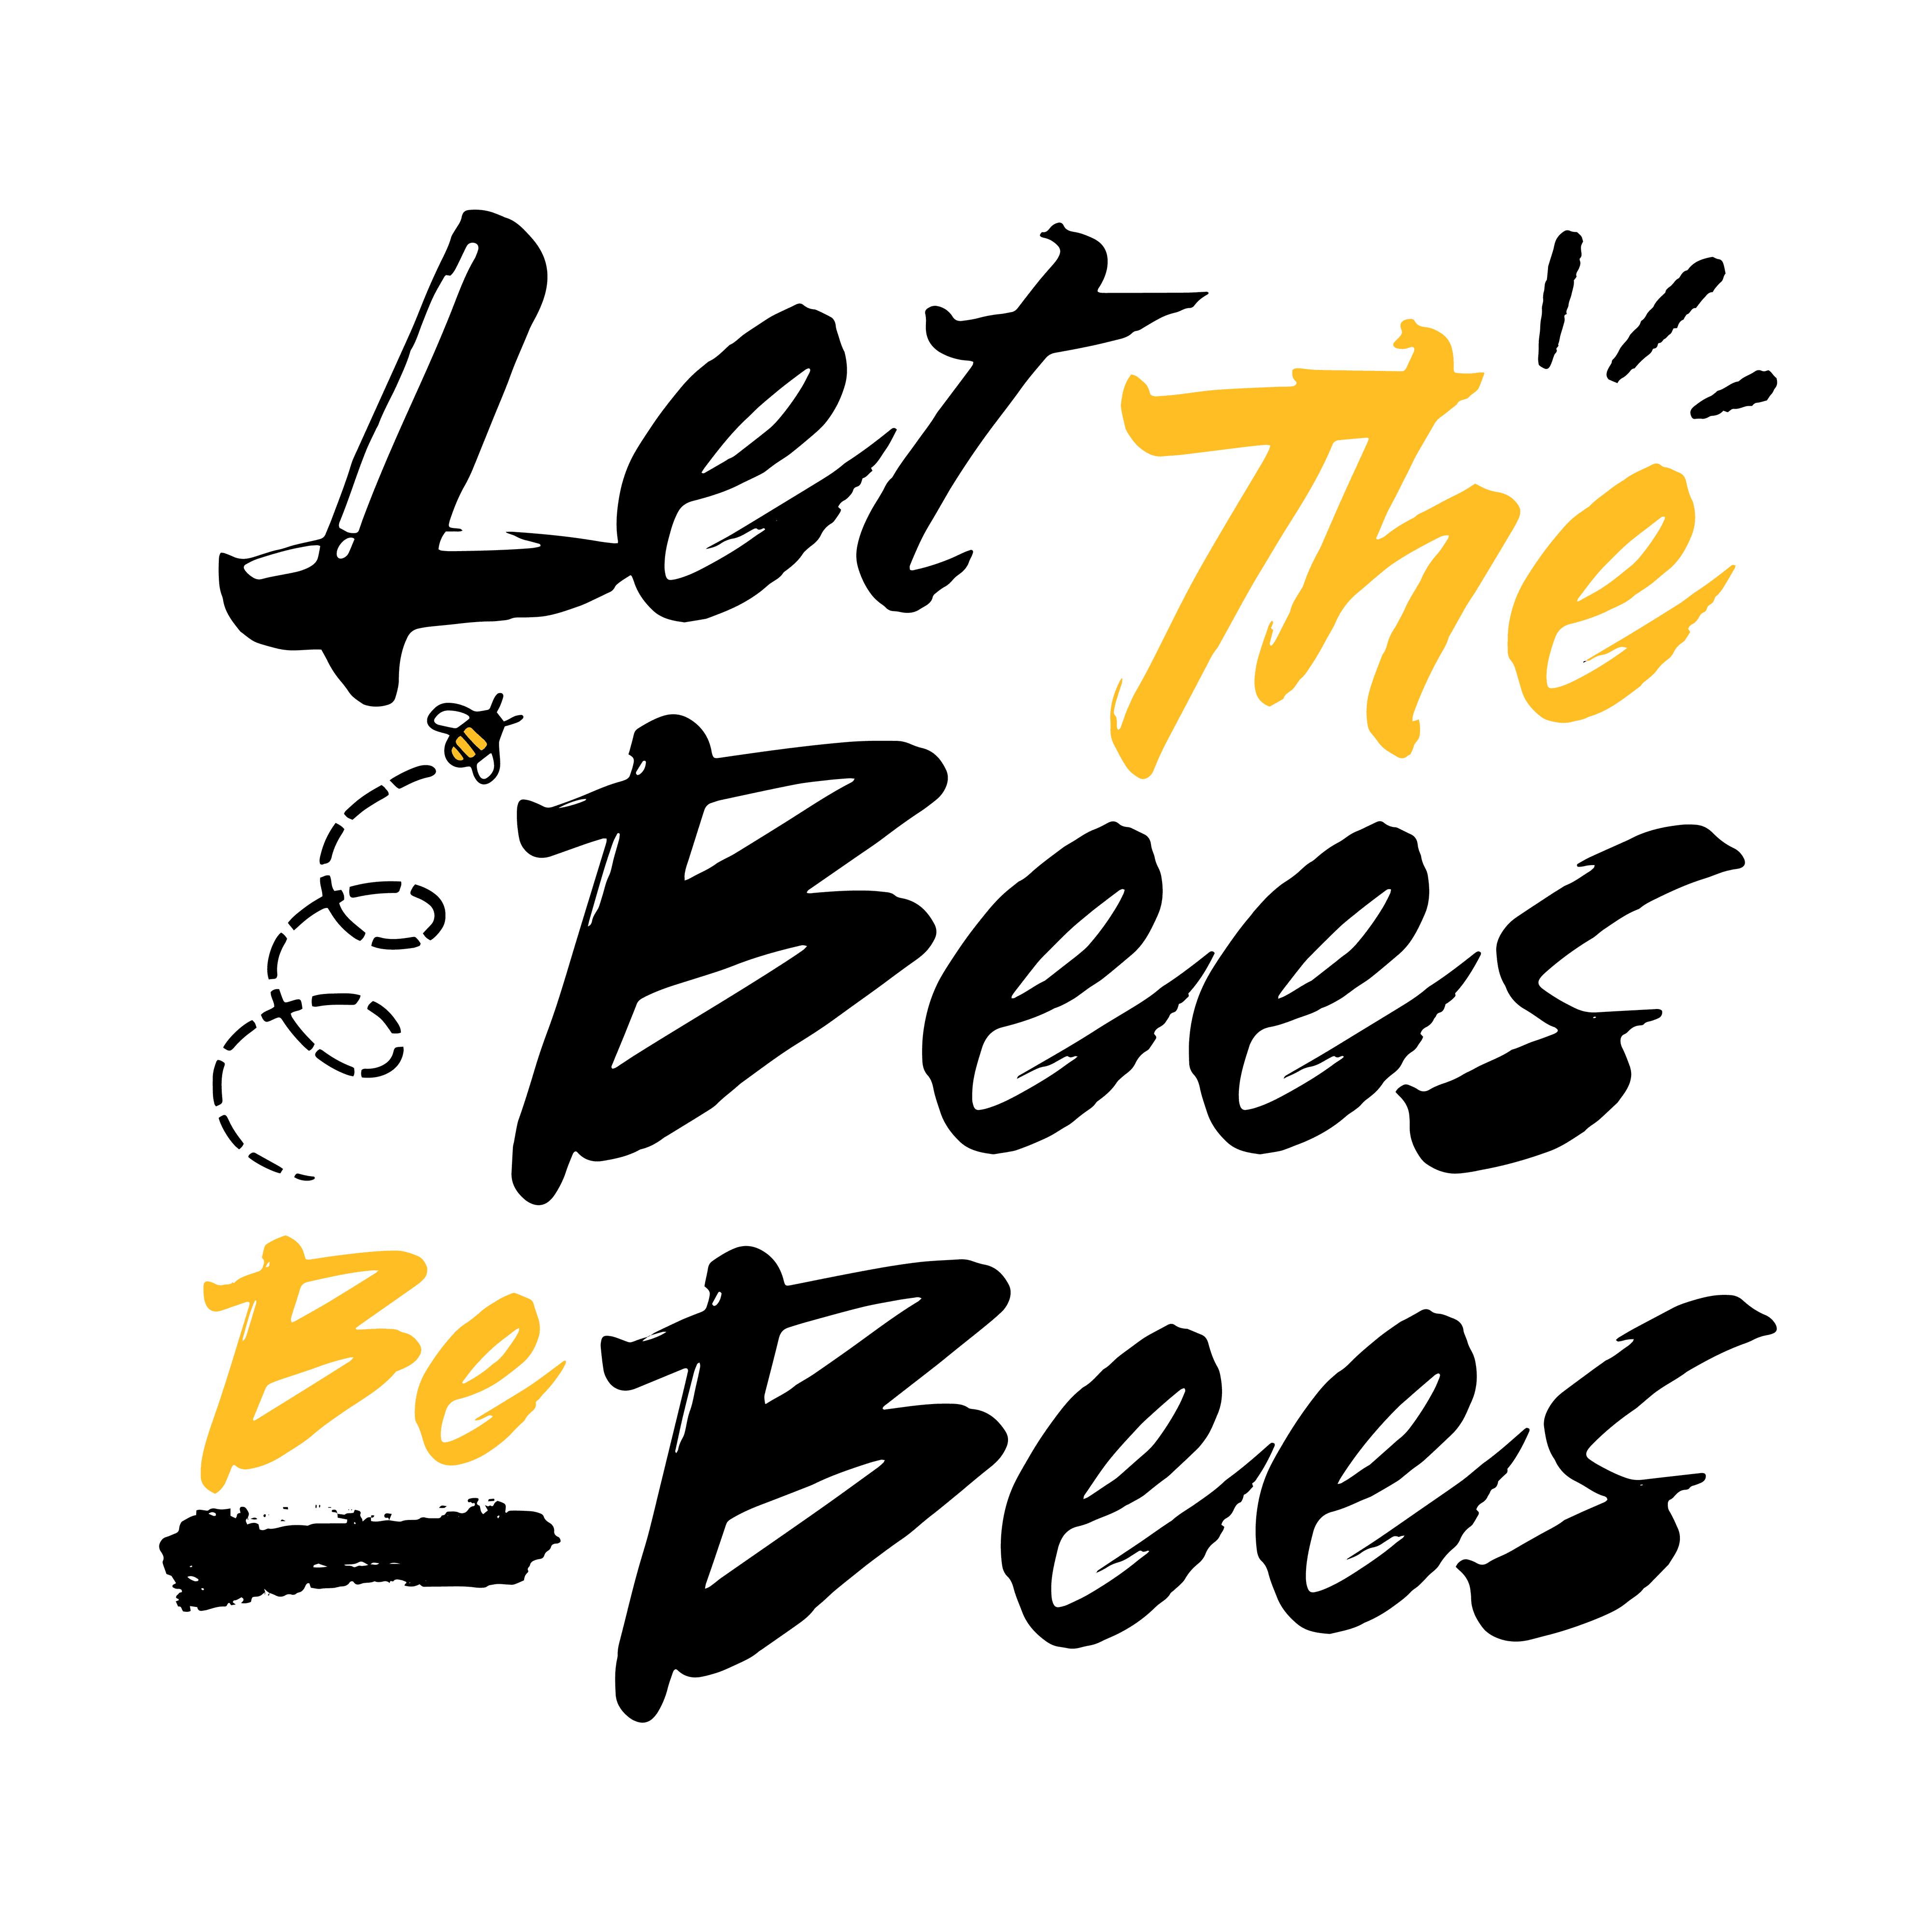 Let the bees be bees